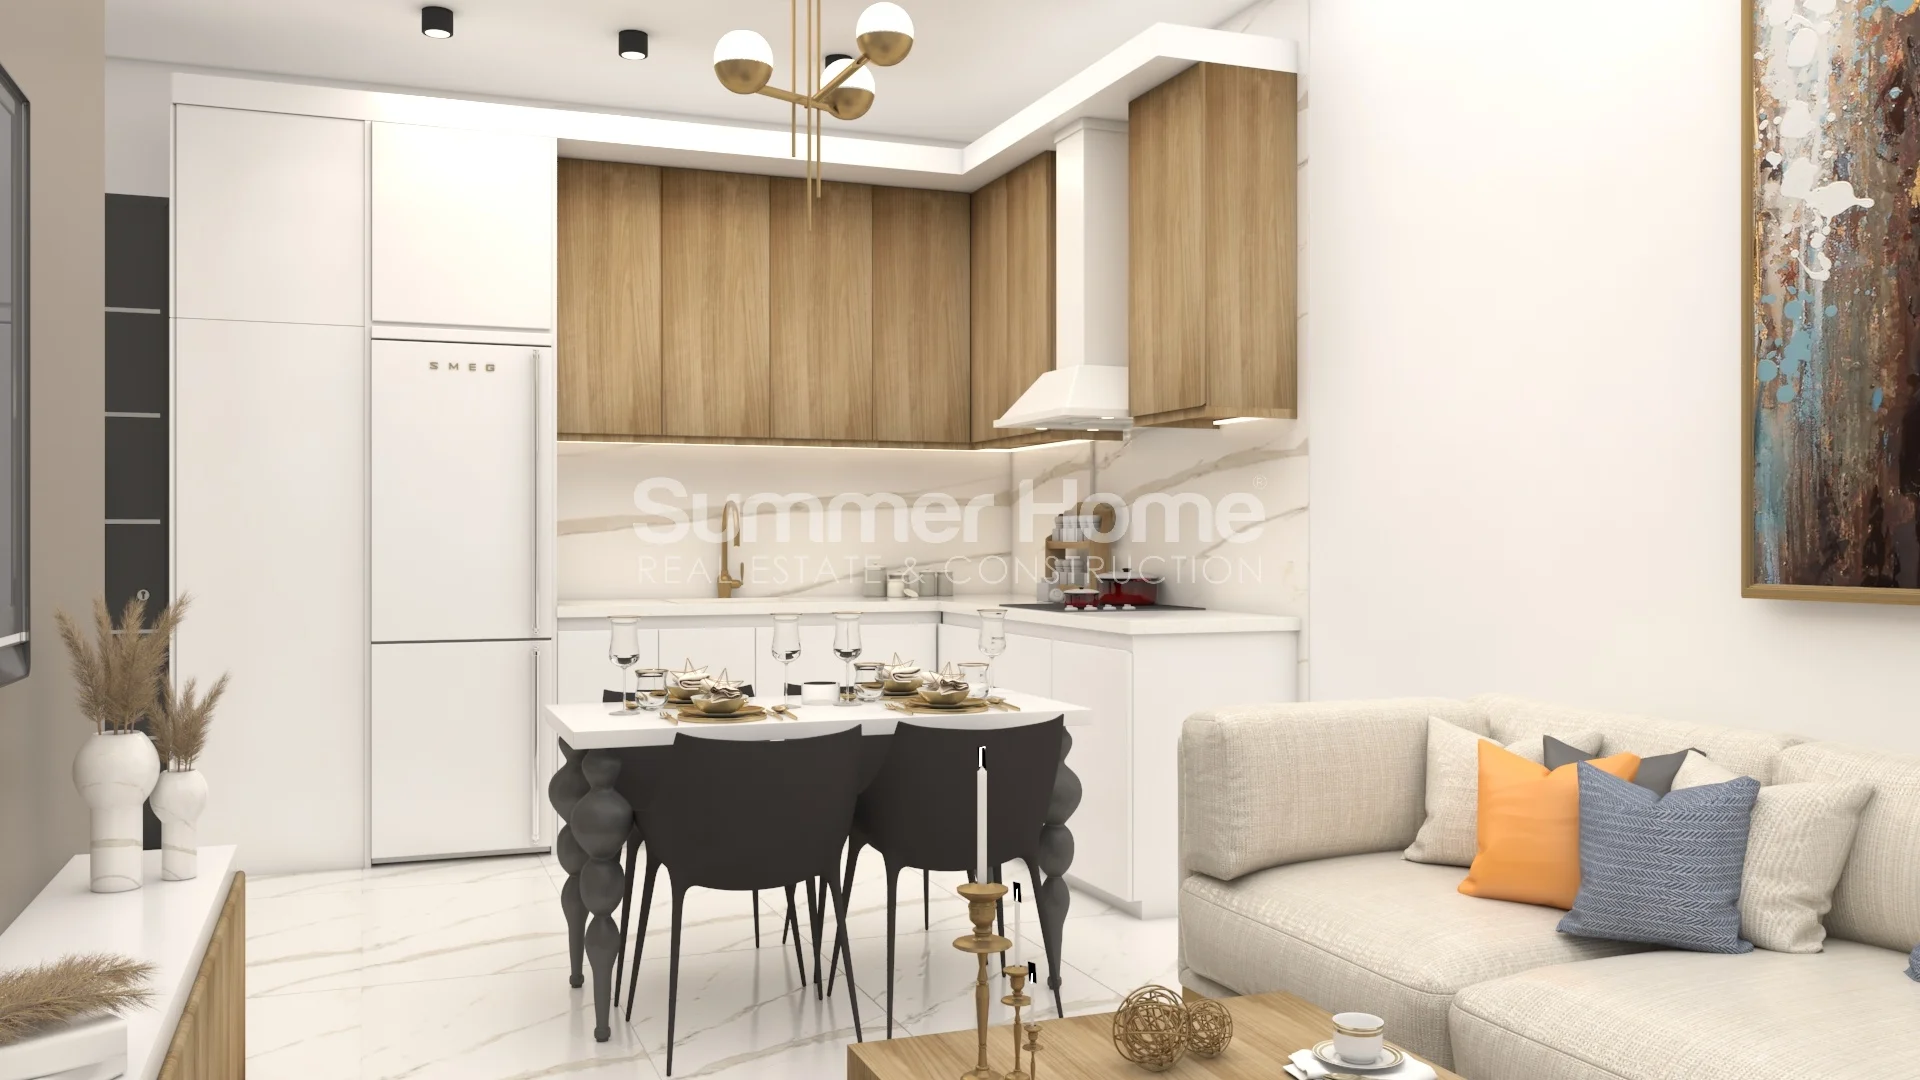 Stunning Sea-View Apartments For Sale in Kargicak Interior - 33